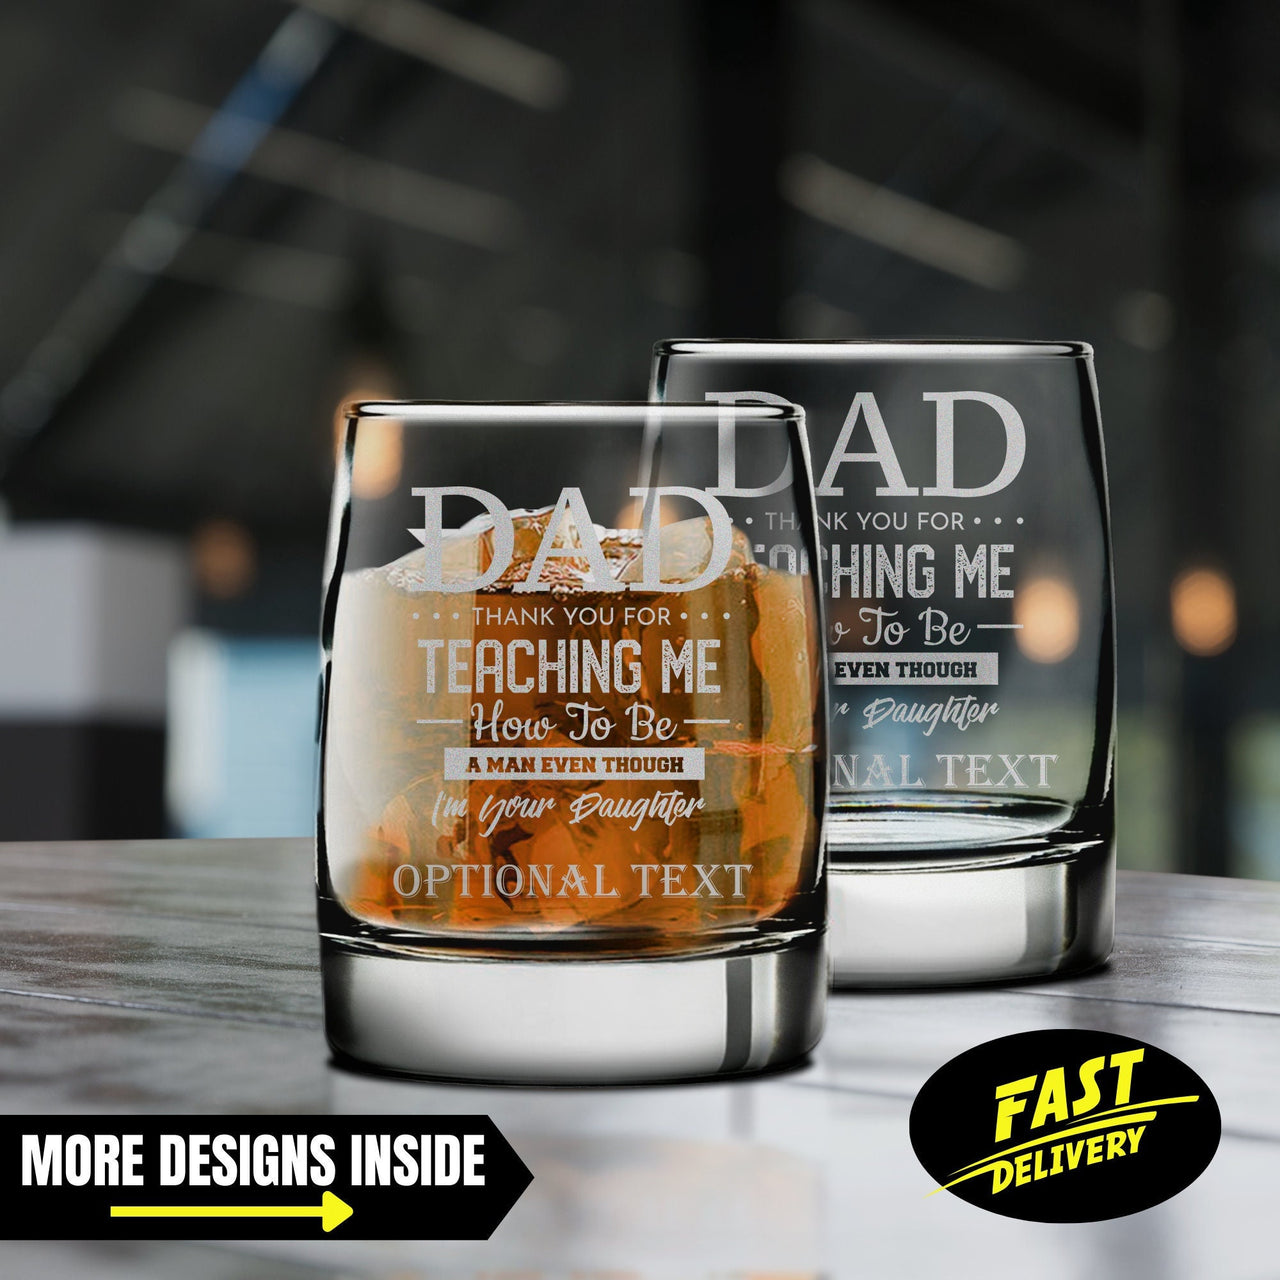 Dad Thank You For Teaching Me How To Be A Man Even Though I’m Your Daughter Sentimental Gifts For Dad From Daughter | Etched Whiskey Glass